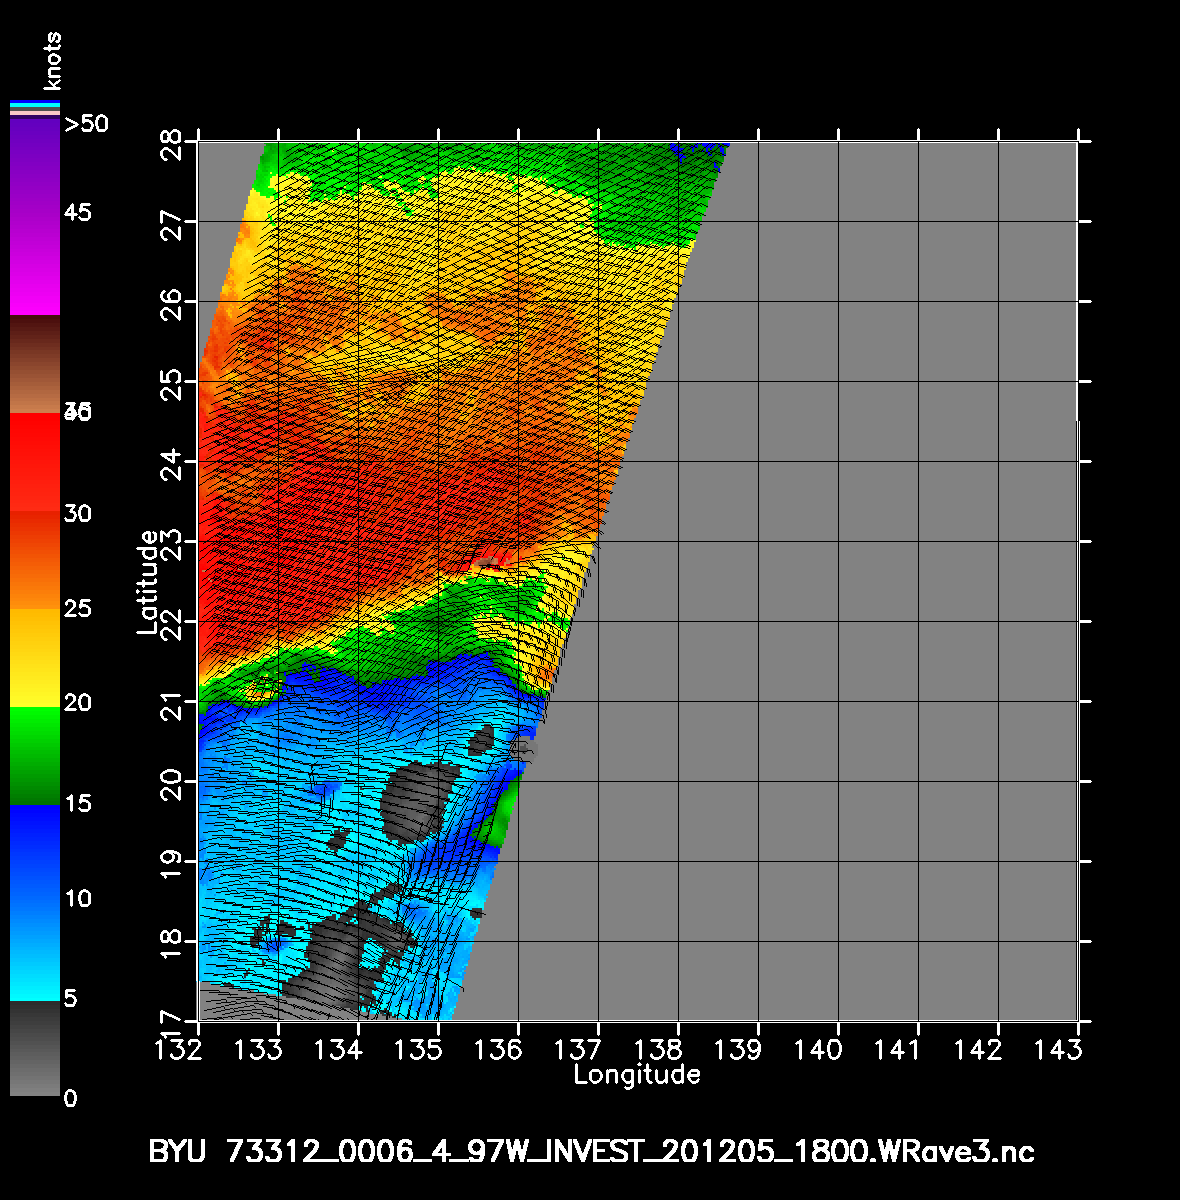 20201205.180000.ASCAT.mta.r73312.wrave3.97W.INVEST.gif